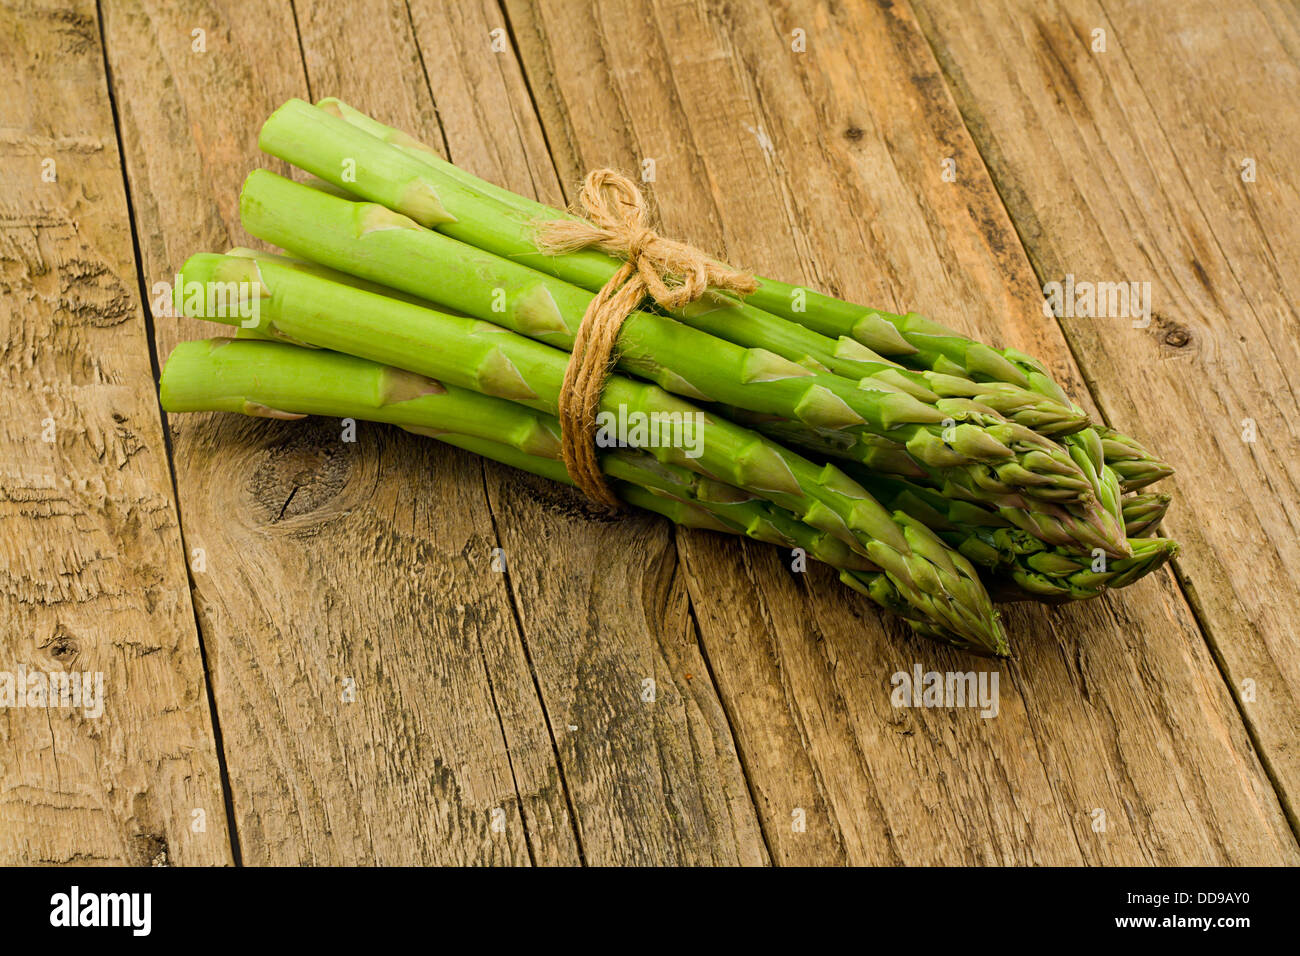 Asparagus bunch a premium seasonal vegetable on a rural rustic antique wooden table top setting Stock Photo